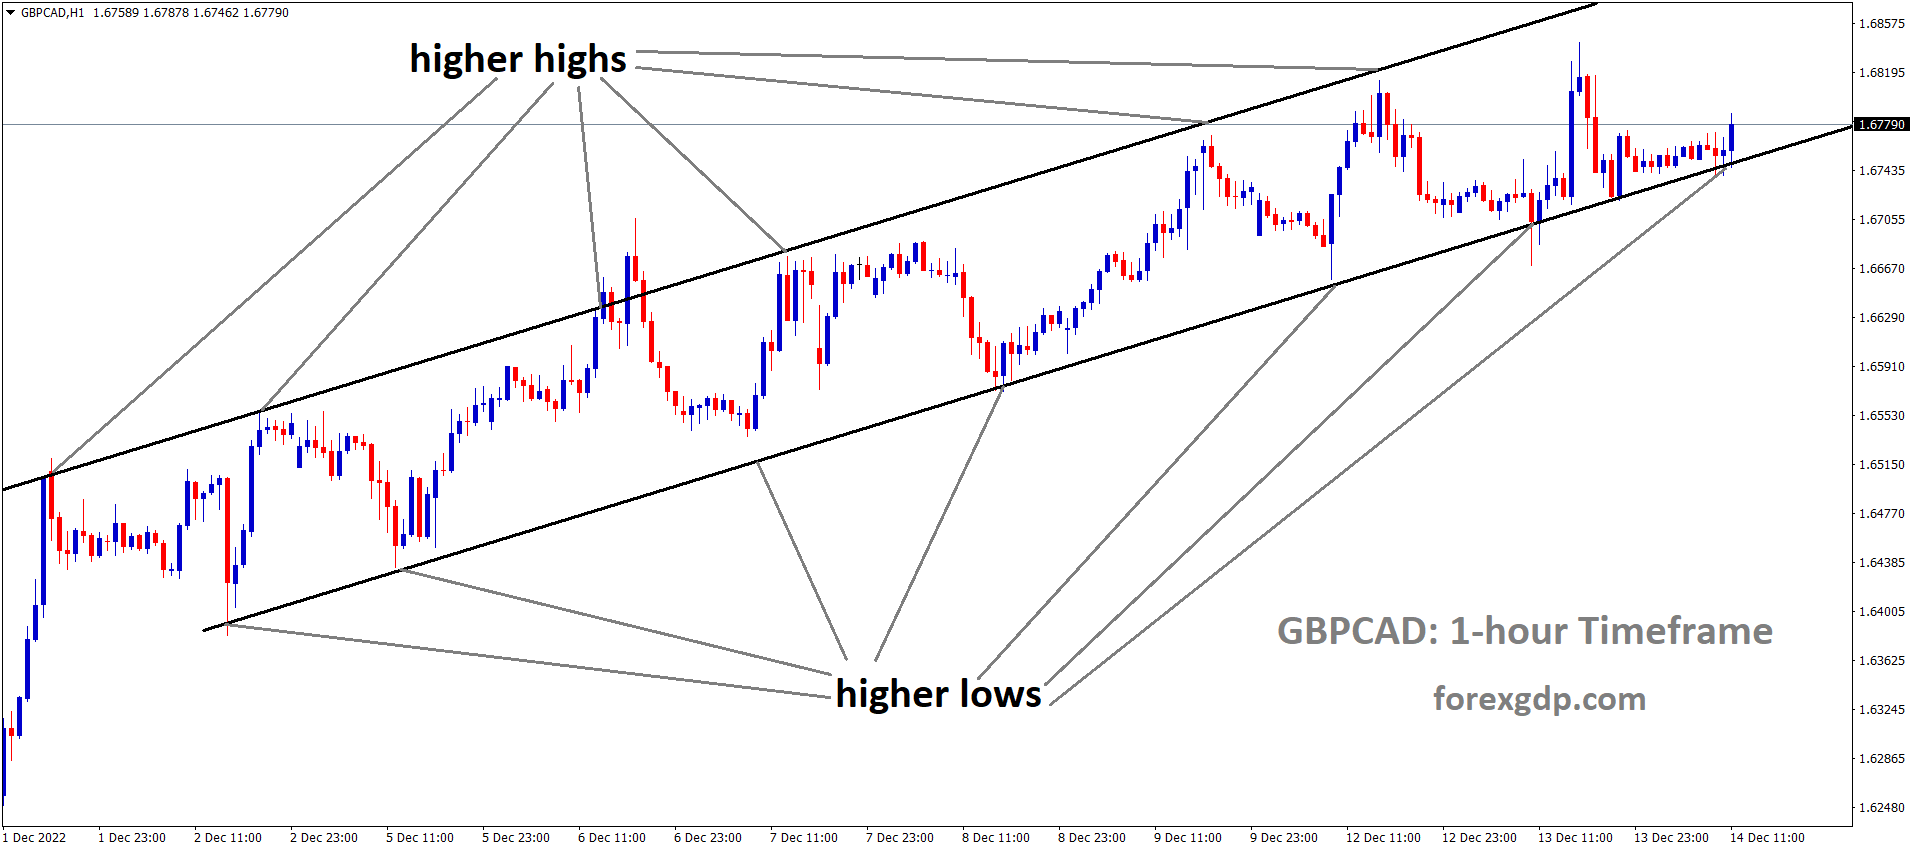 GBPCAD is moving in an Ascending channel and the market has rebounded from the higher low area of the channel 1